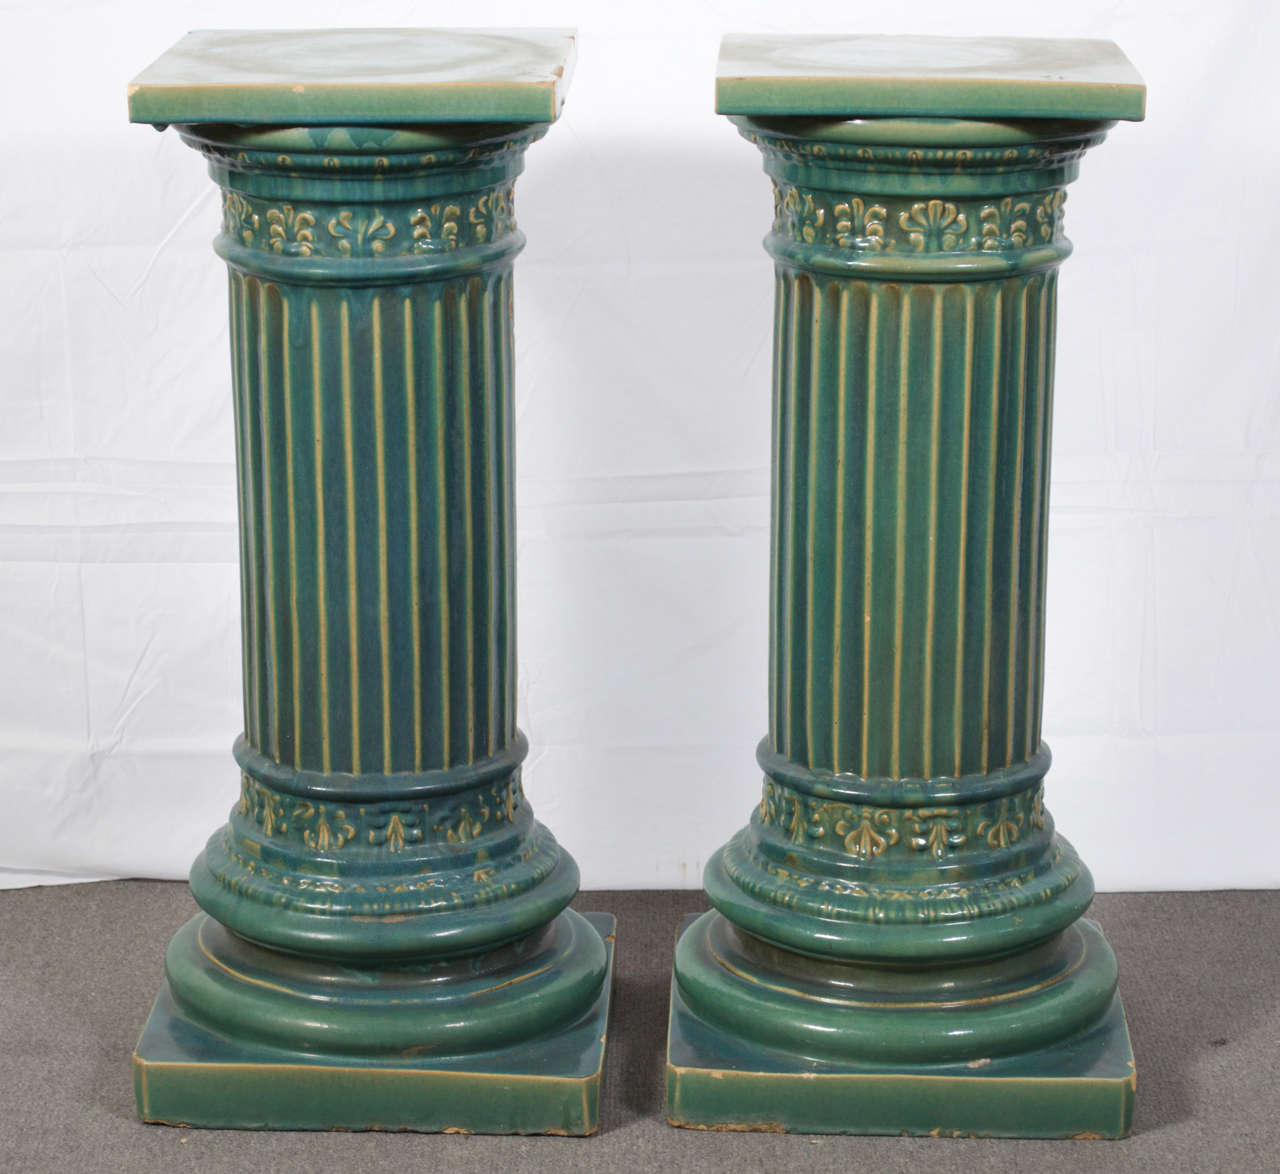 A pair of early 20th century doric style columns, in Aqua Green, by Gladding McBean. Gladding McBean was well known for producing some of the most amazing pottery and architectural elements at the time... the golden age of California art pottery. 